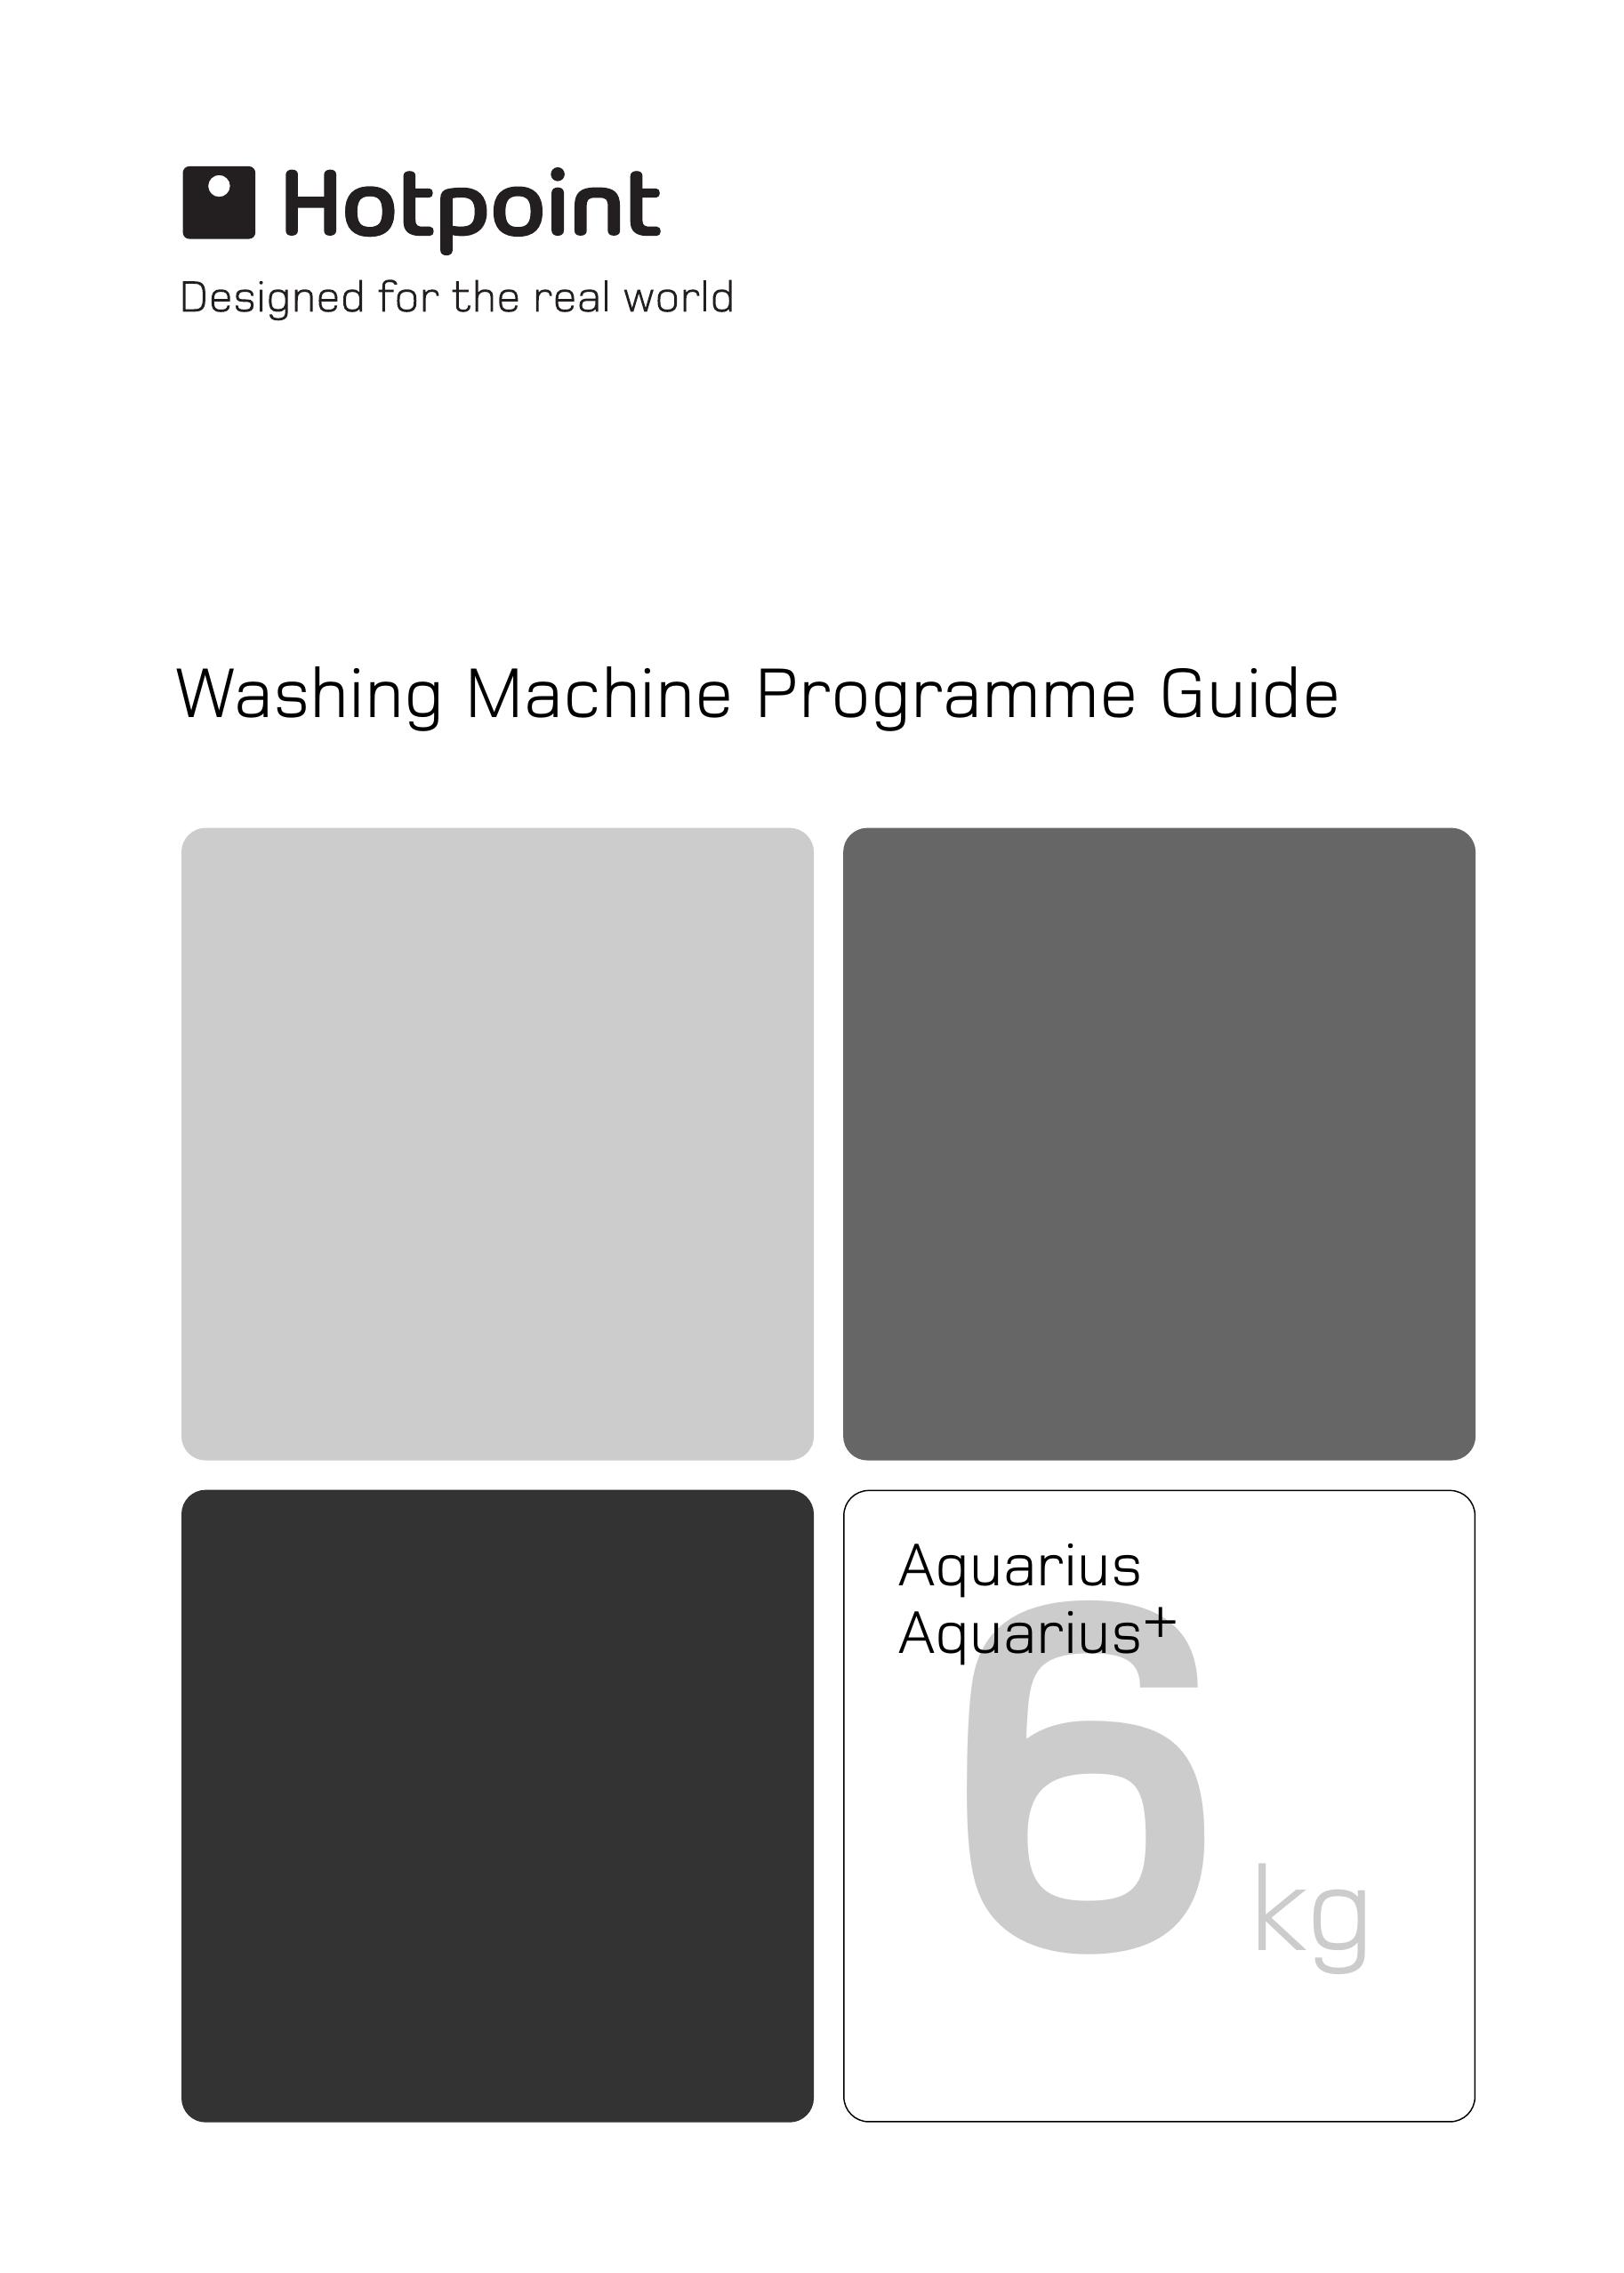 Hotpoint Aquarius+ Clothes Dryer User Manual (Page 1)